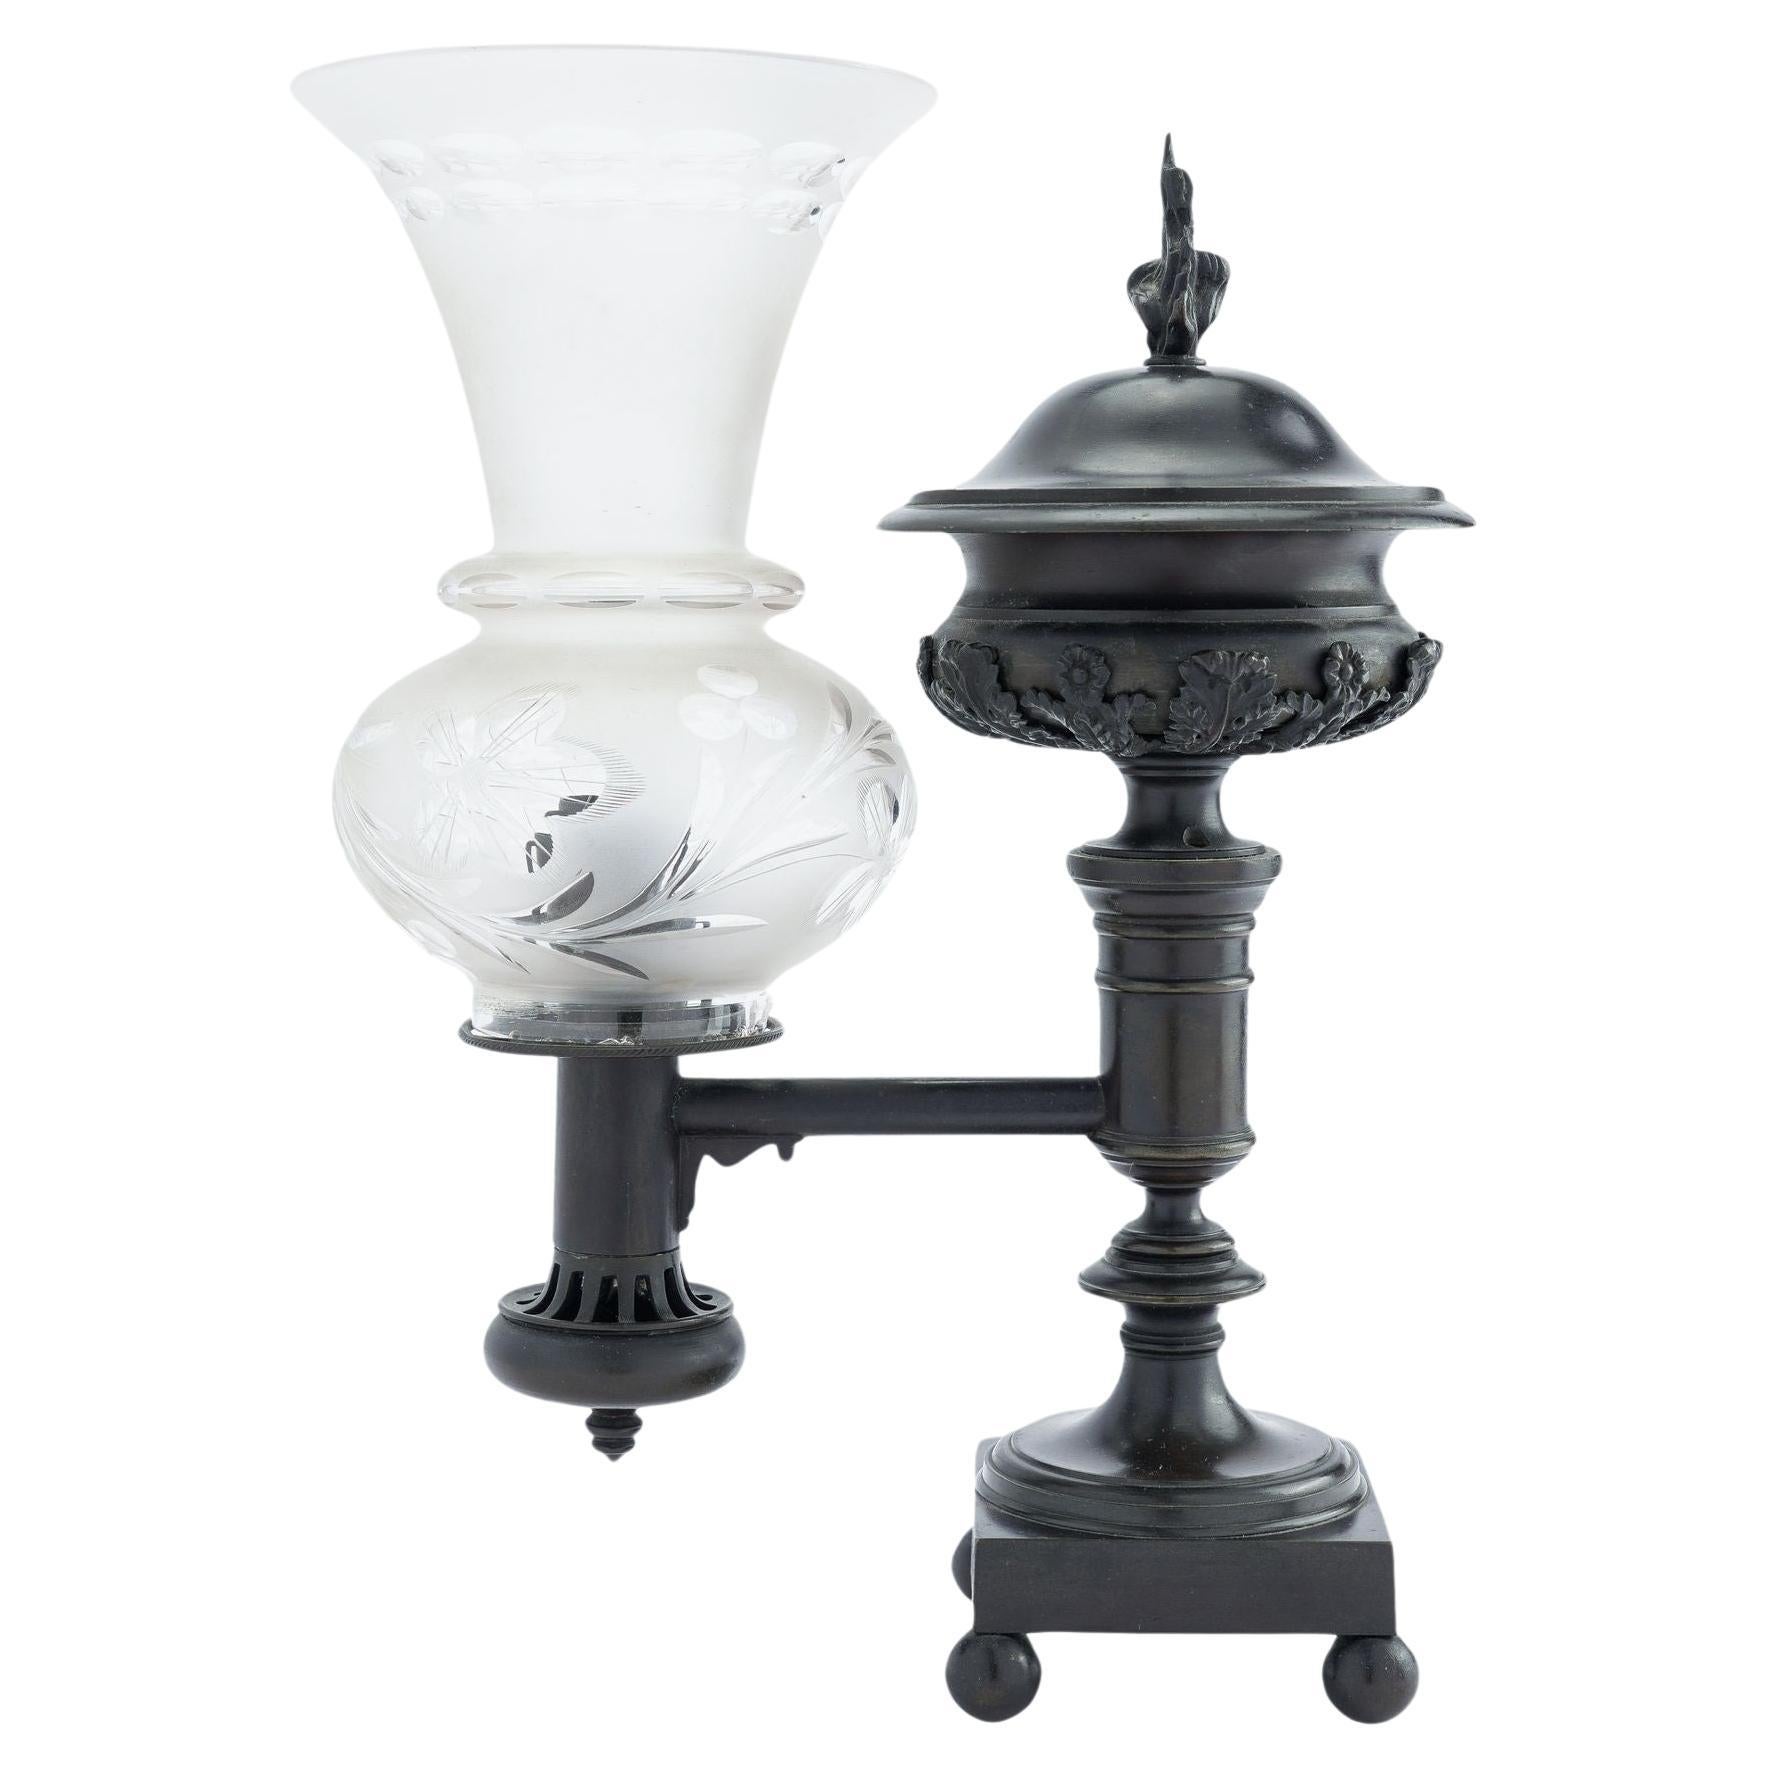 Why was the Argand lamp invented?